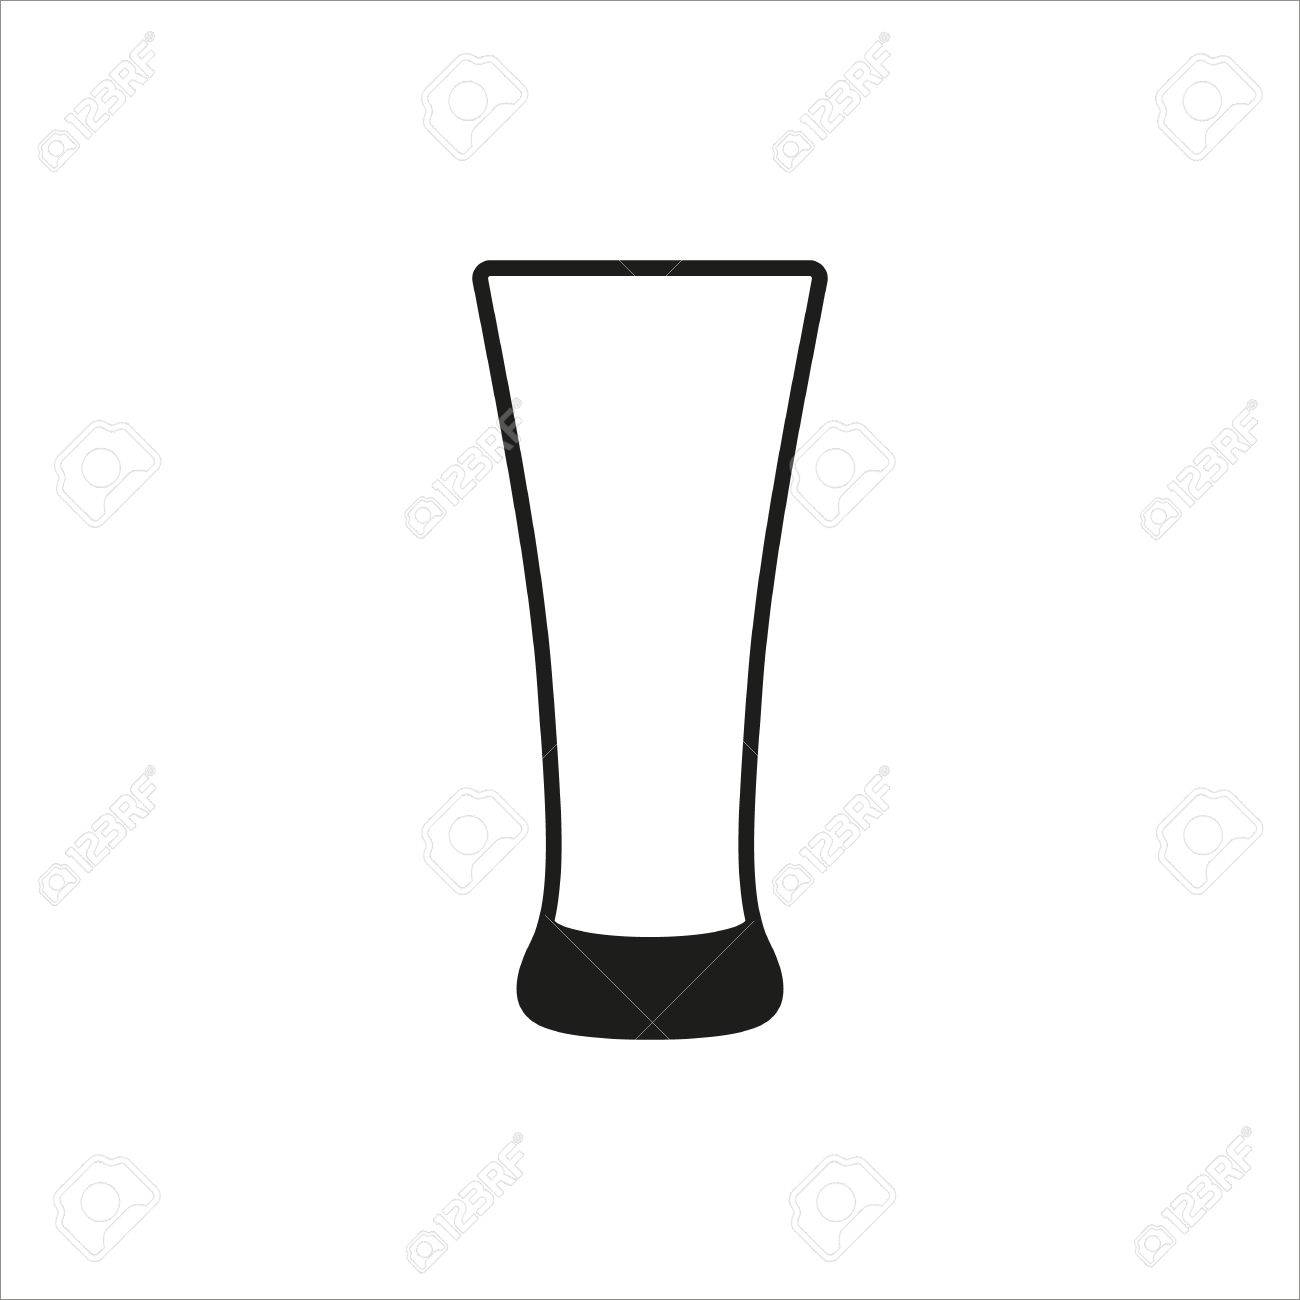 Vector illustration of empty beer mug icon Created For Mobile,...